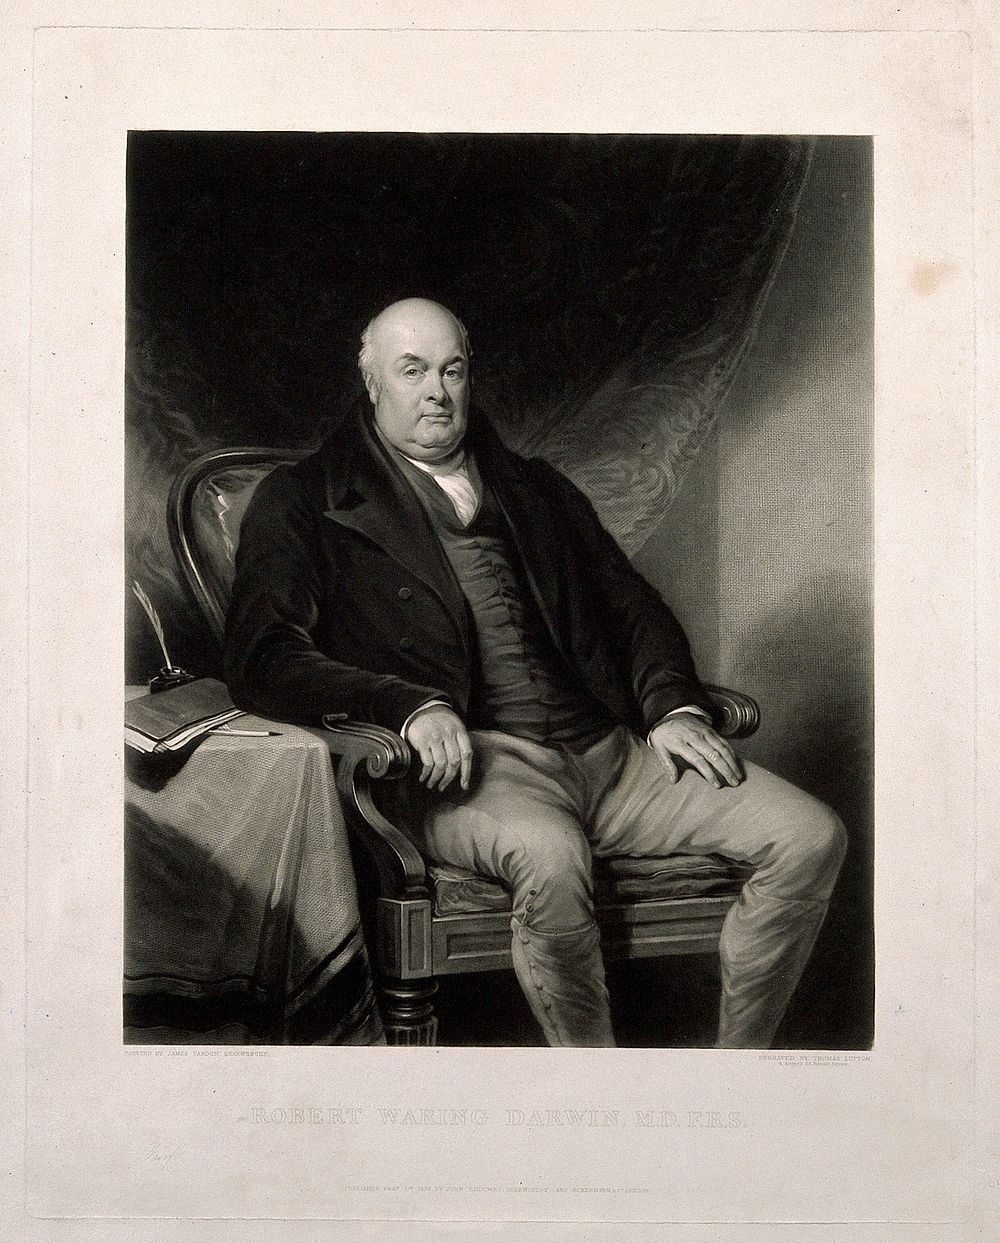 Robert Waring Darwin, seated in an armchair: beside him a letter-book, pen and ink on a table. Mezzotint by T. Lupton, 1839…